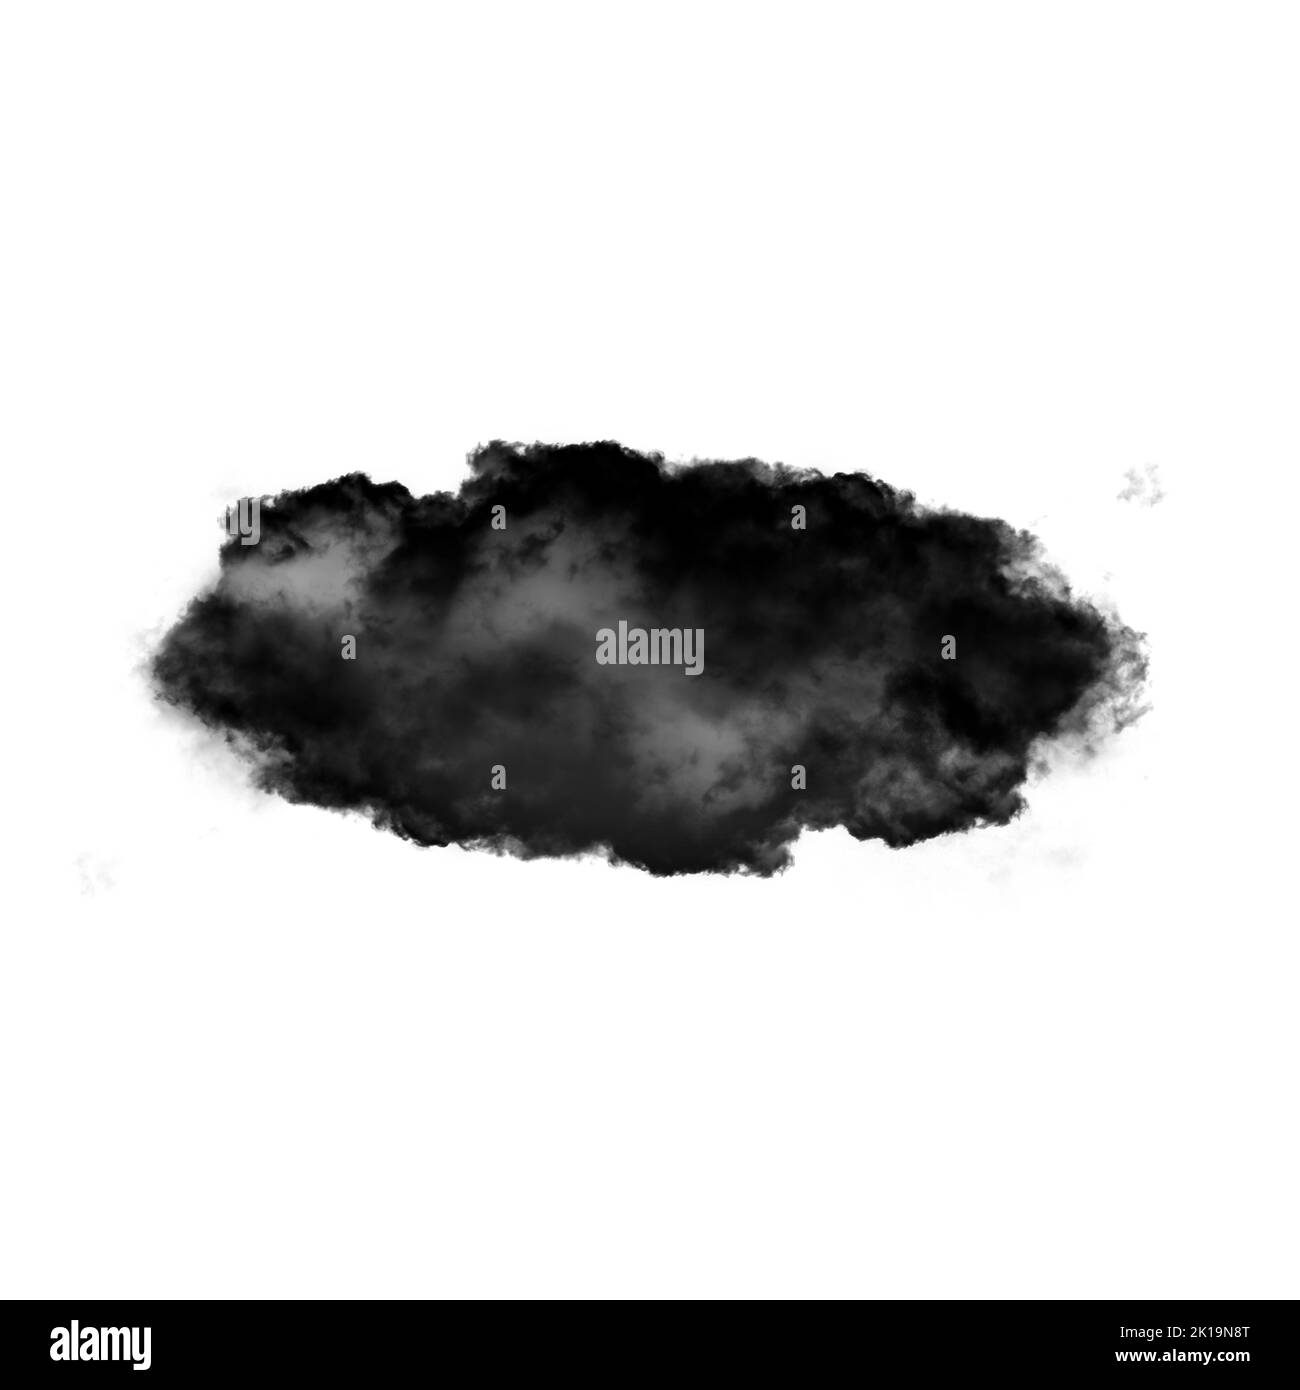 Black cloud isolated over white background 3D illustration, natural smoke cloud shape Stock Photo